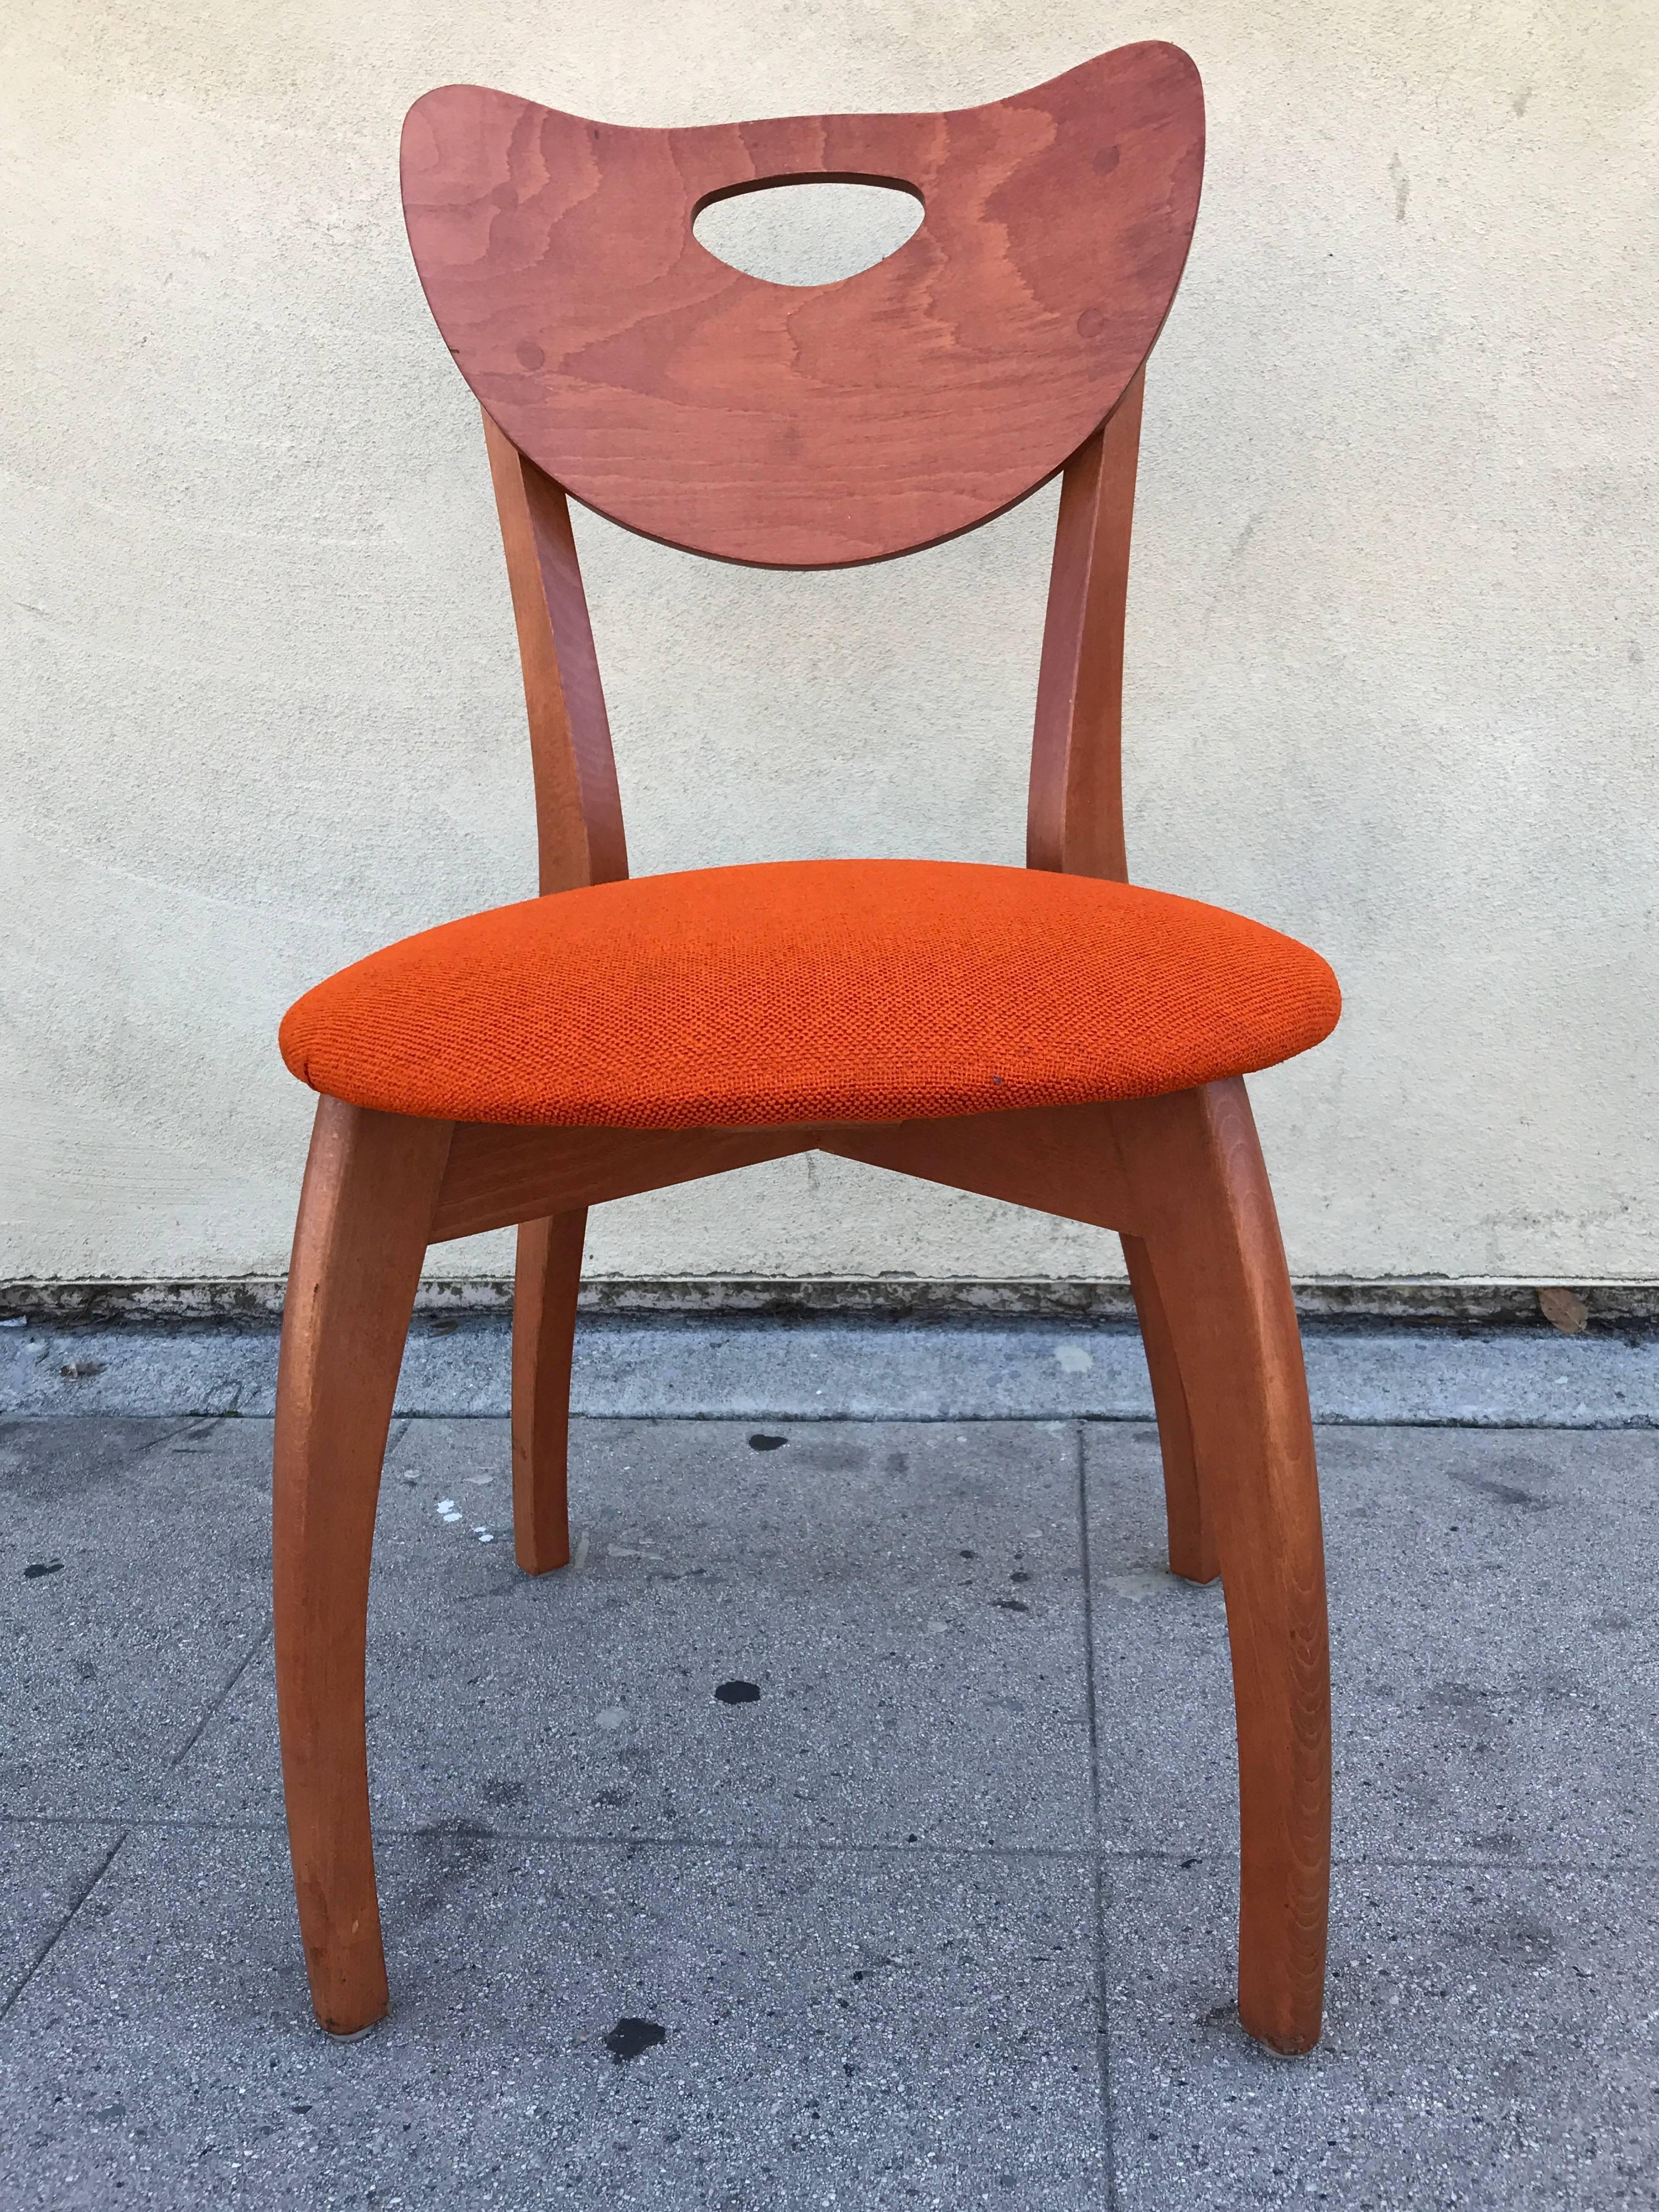 Set of four Danish modern chairs in teak with their original burnt orange colored upholstery
 

 